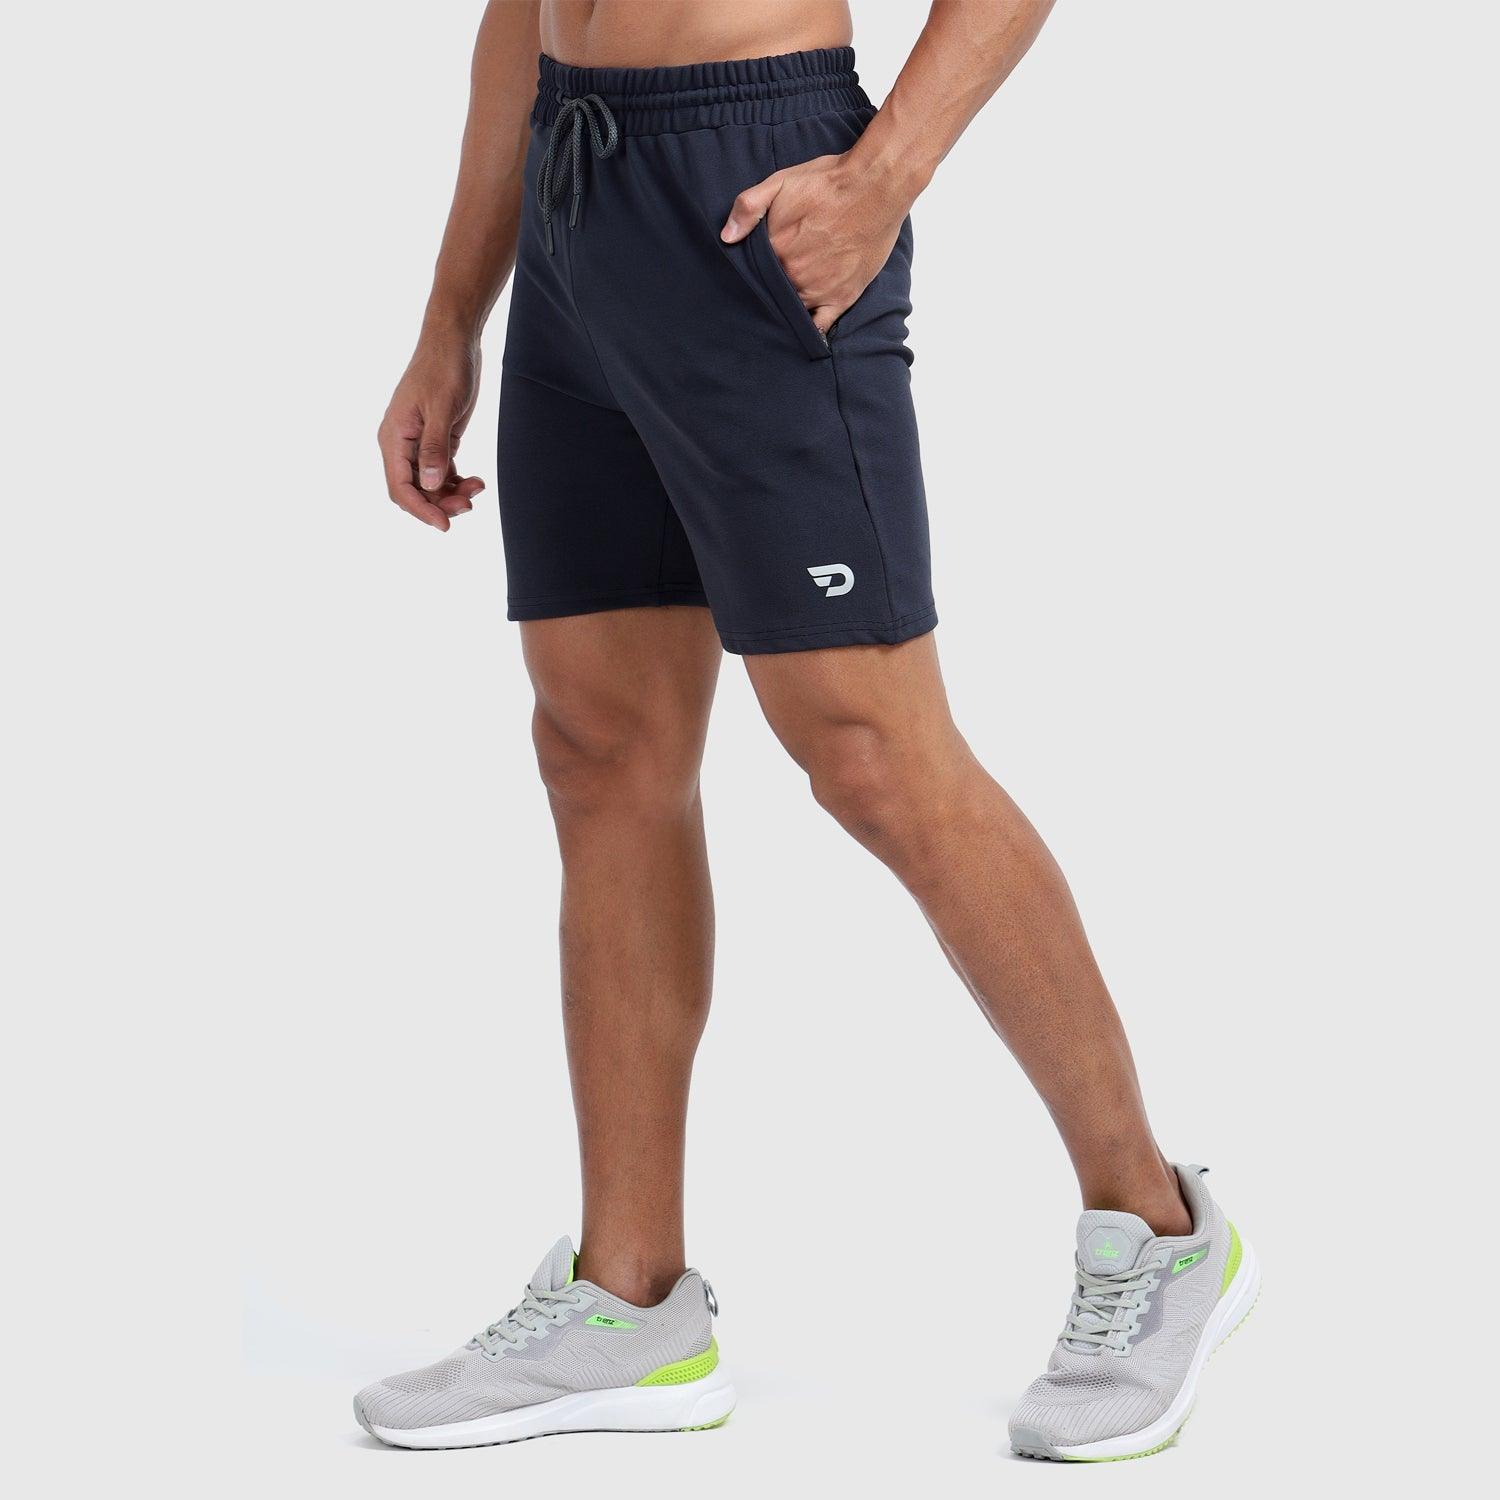 Denmonk's fashionable Trekready charcoal shorts for men will boost your level of gym fitness.